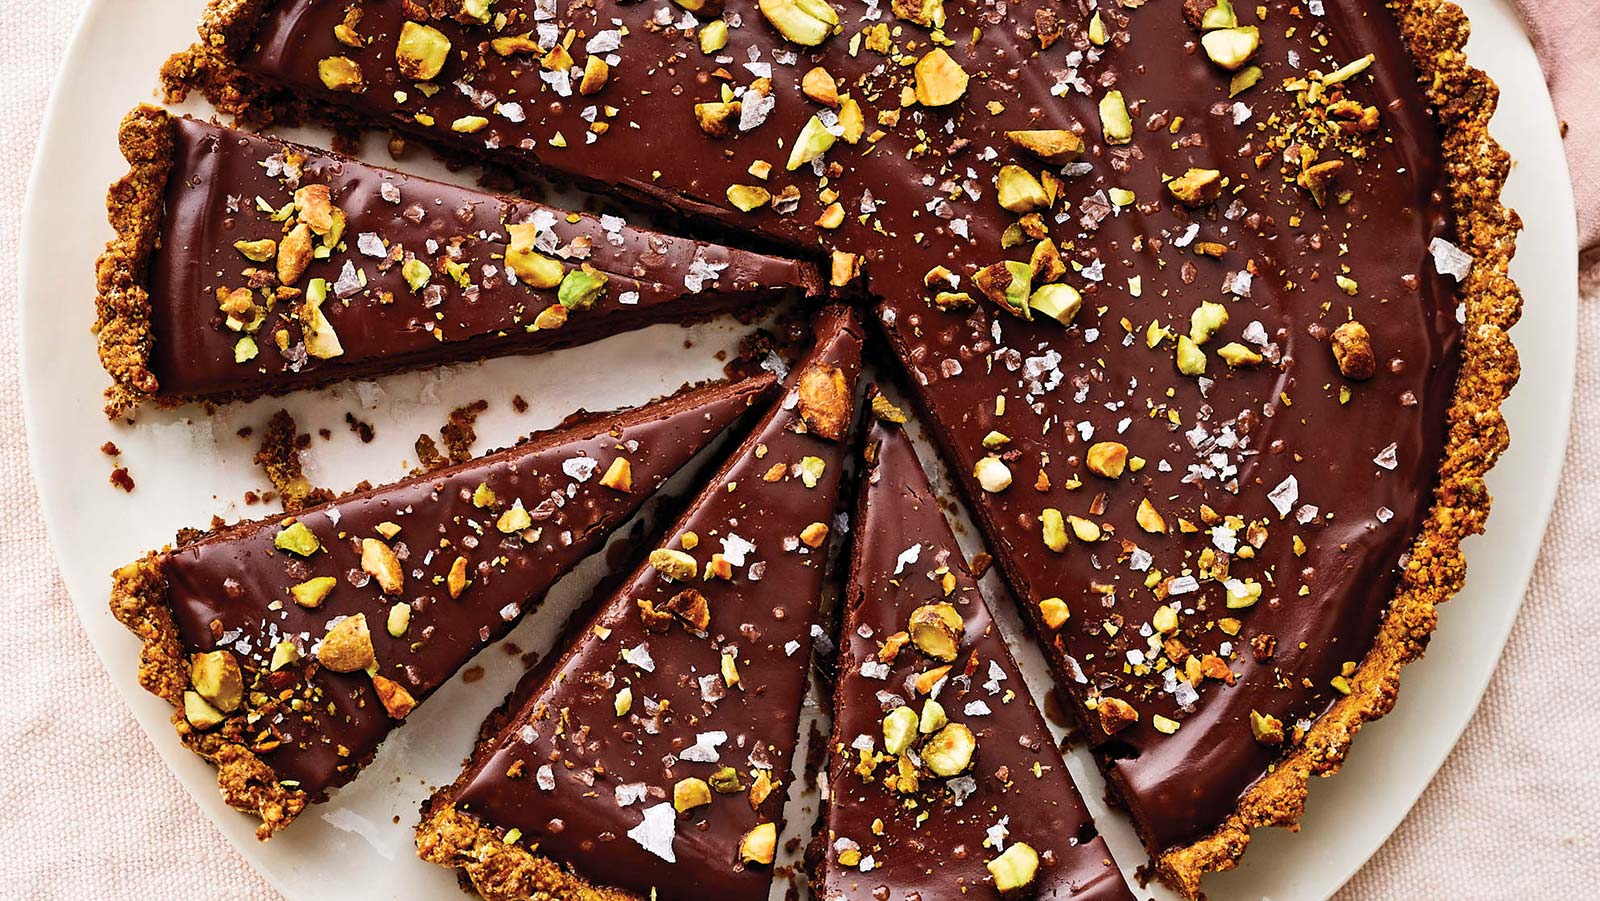 🍰 Only a Baked Good Connoisseur Will Have Eaten at Least 20/39 of These Foods Chocolate Tart